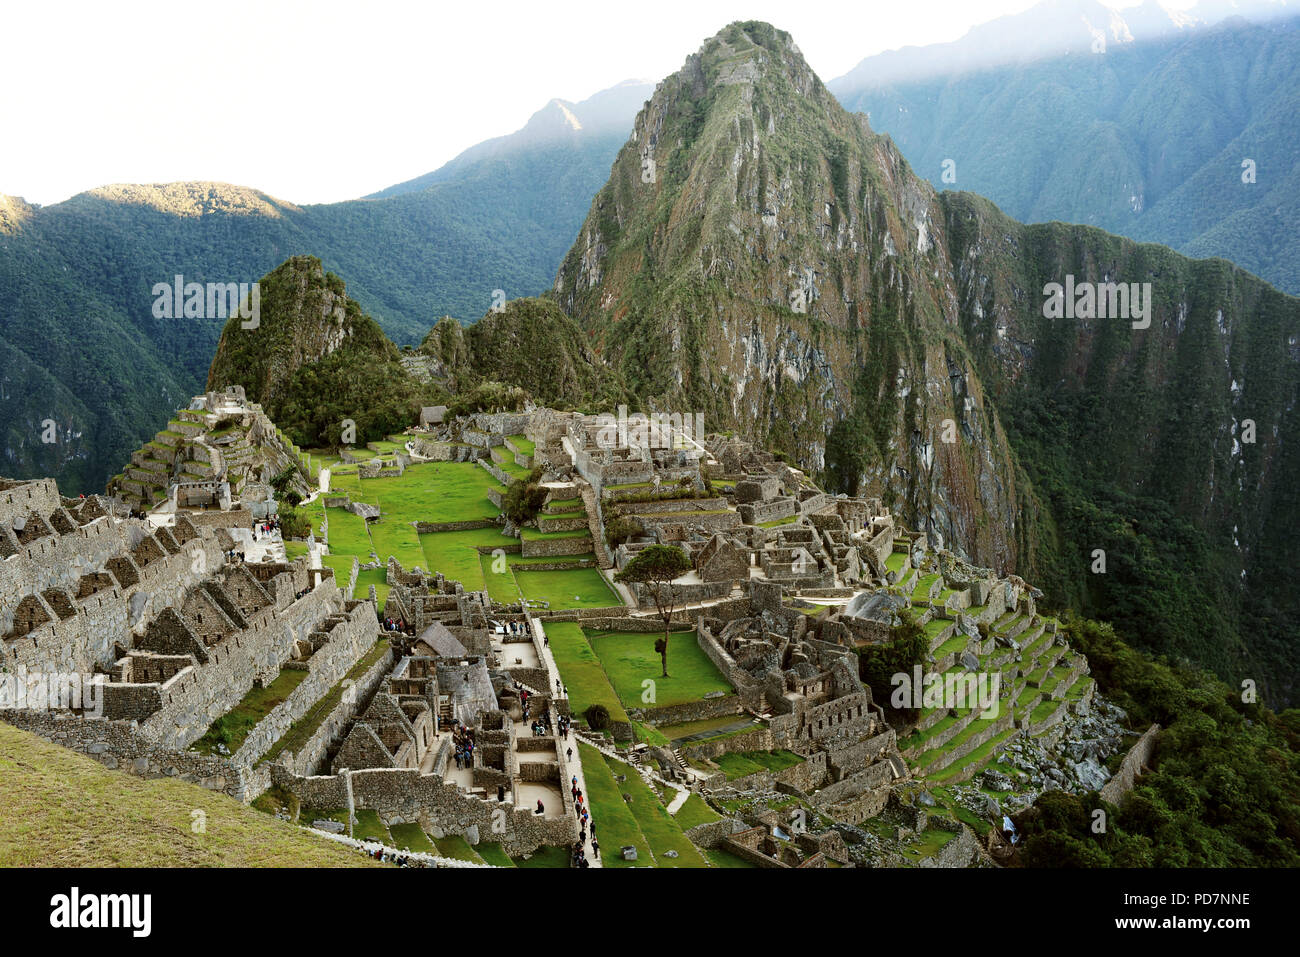 Close up shot of Machu Picchu (UNESCO World Heritage Site) during the early morning. Aguas Calientes, Peru. Jul 2018 Stock Photo